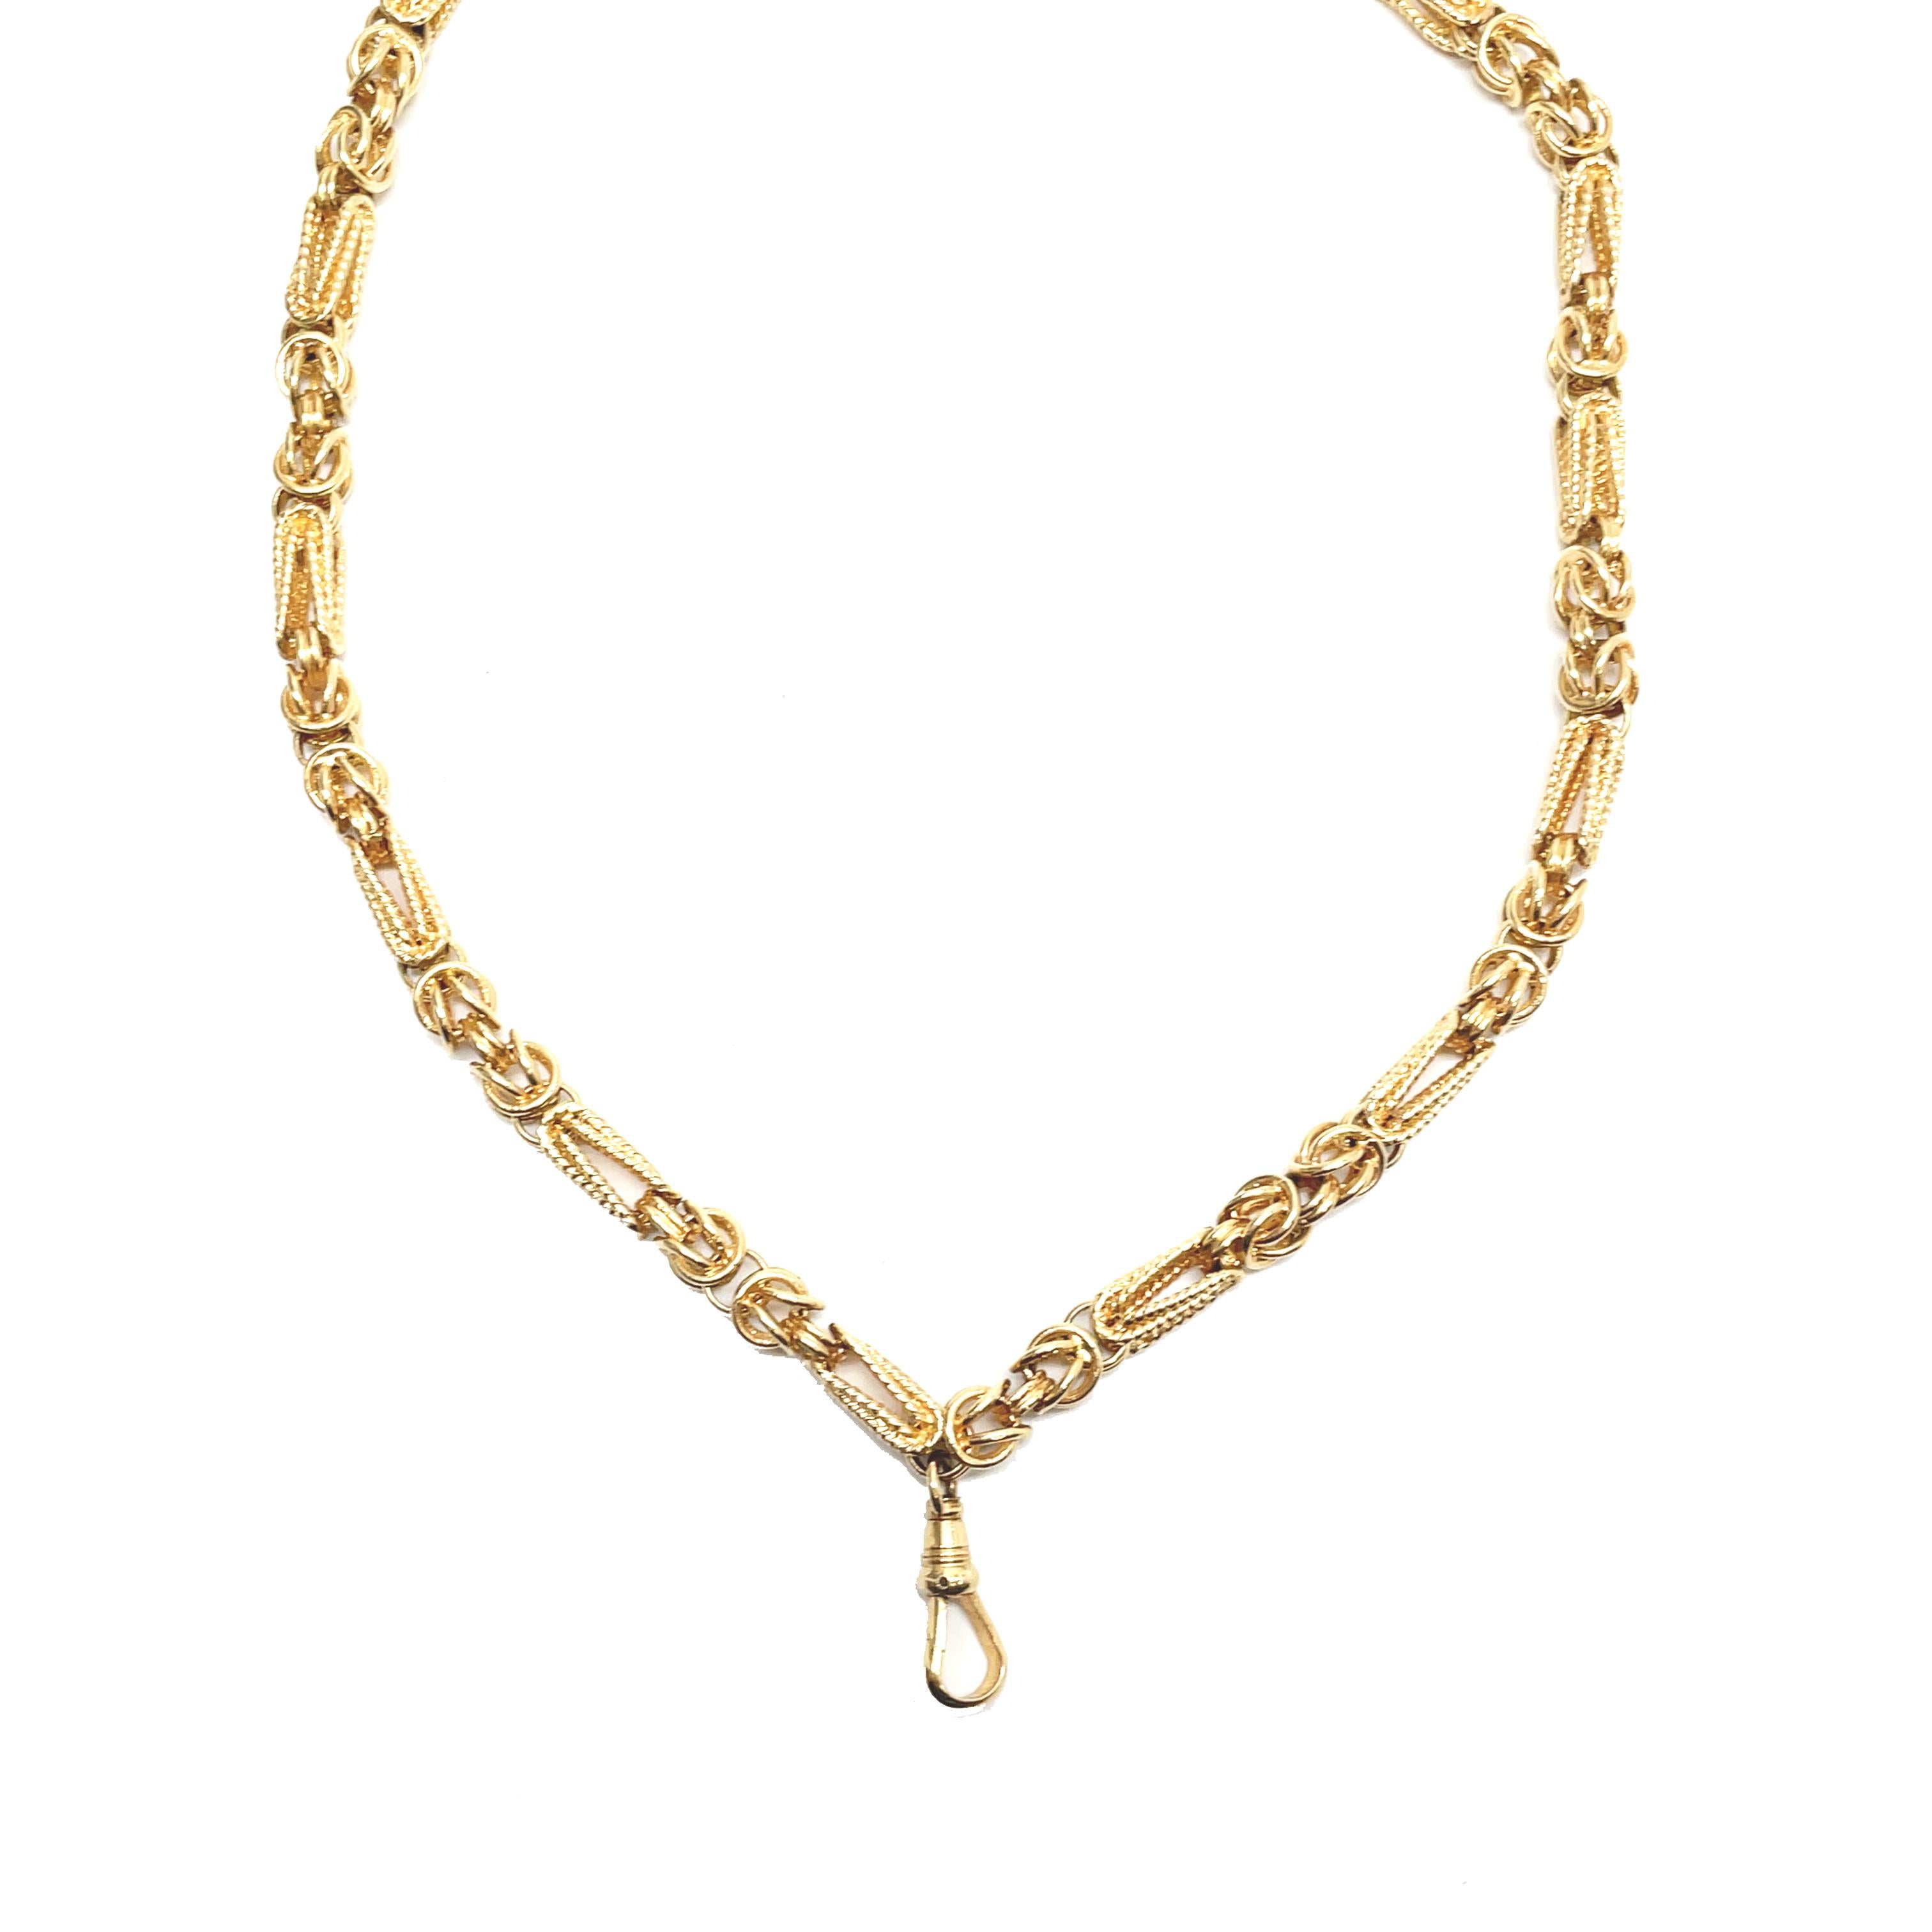 1970's Hand-Crafted Long Yellow Gold Chain 2